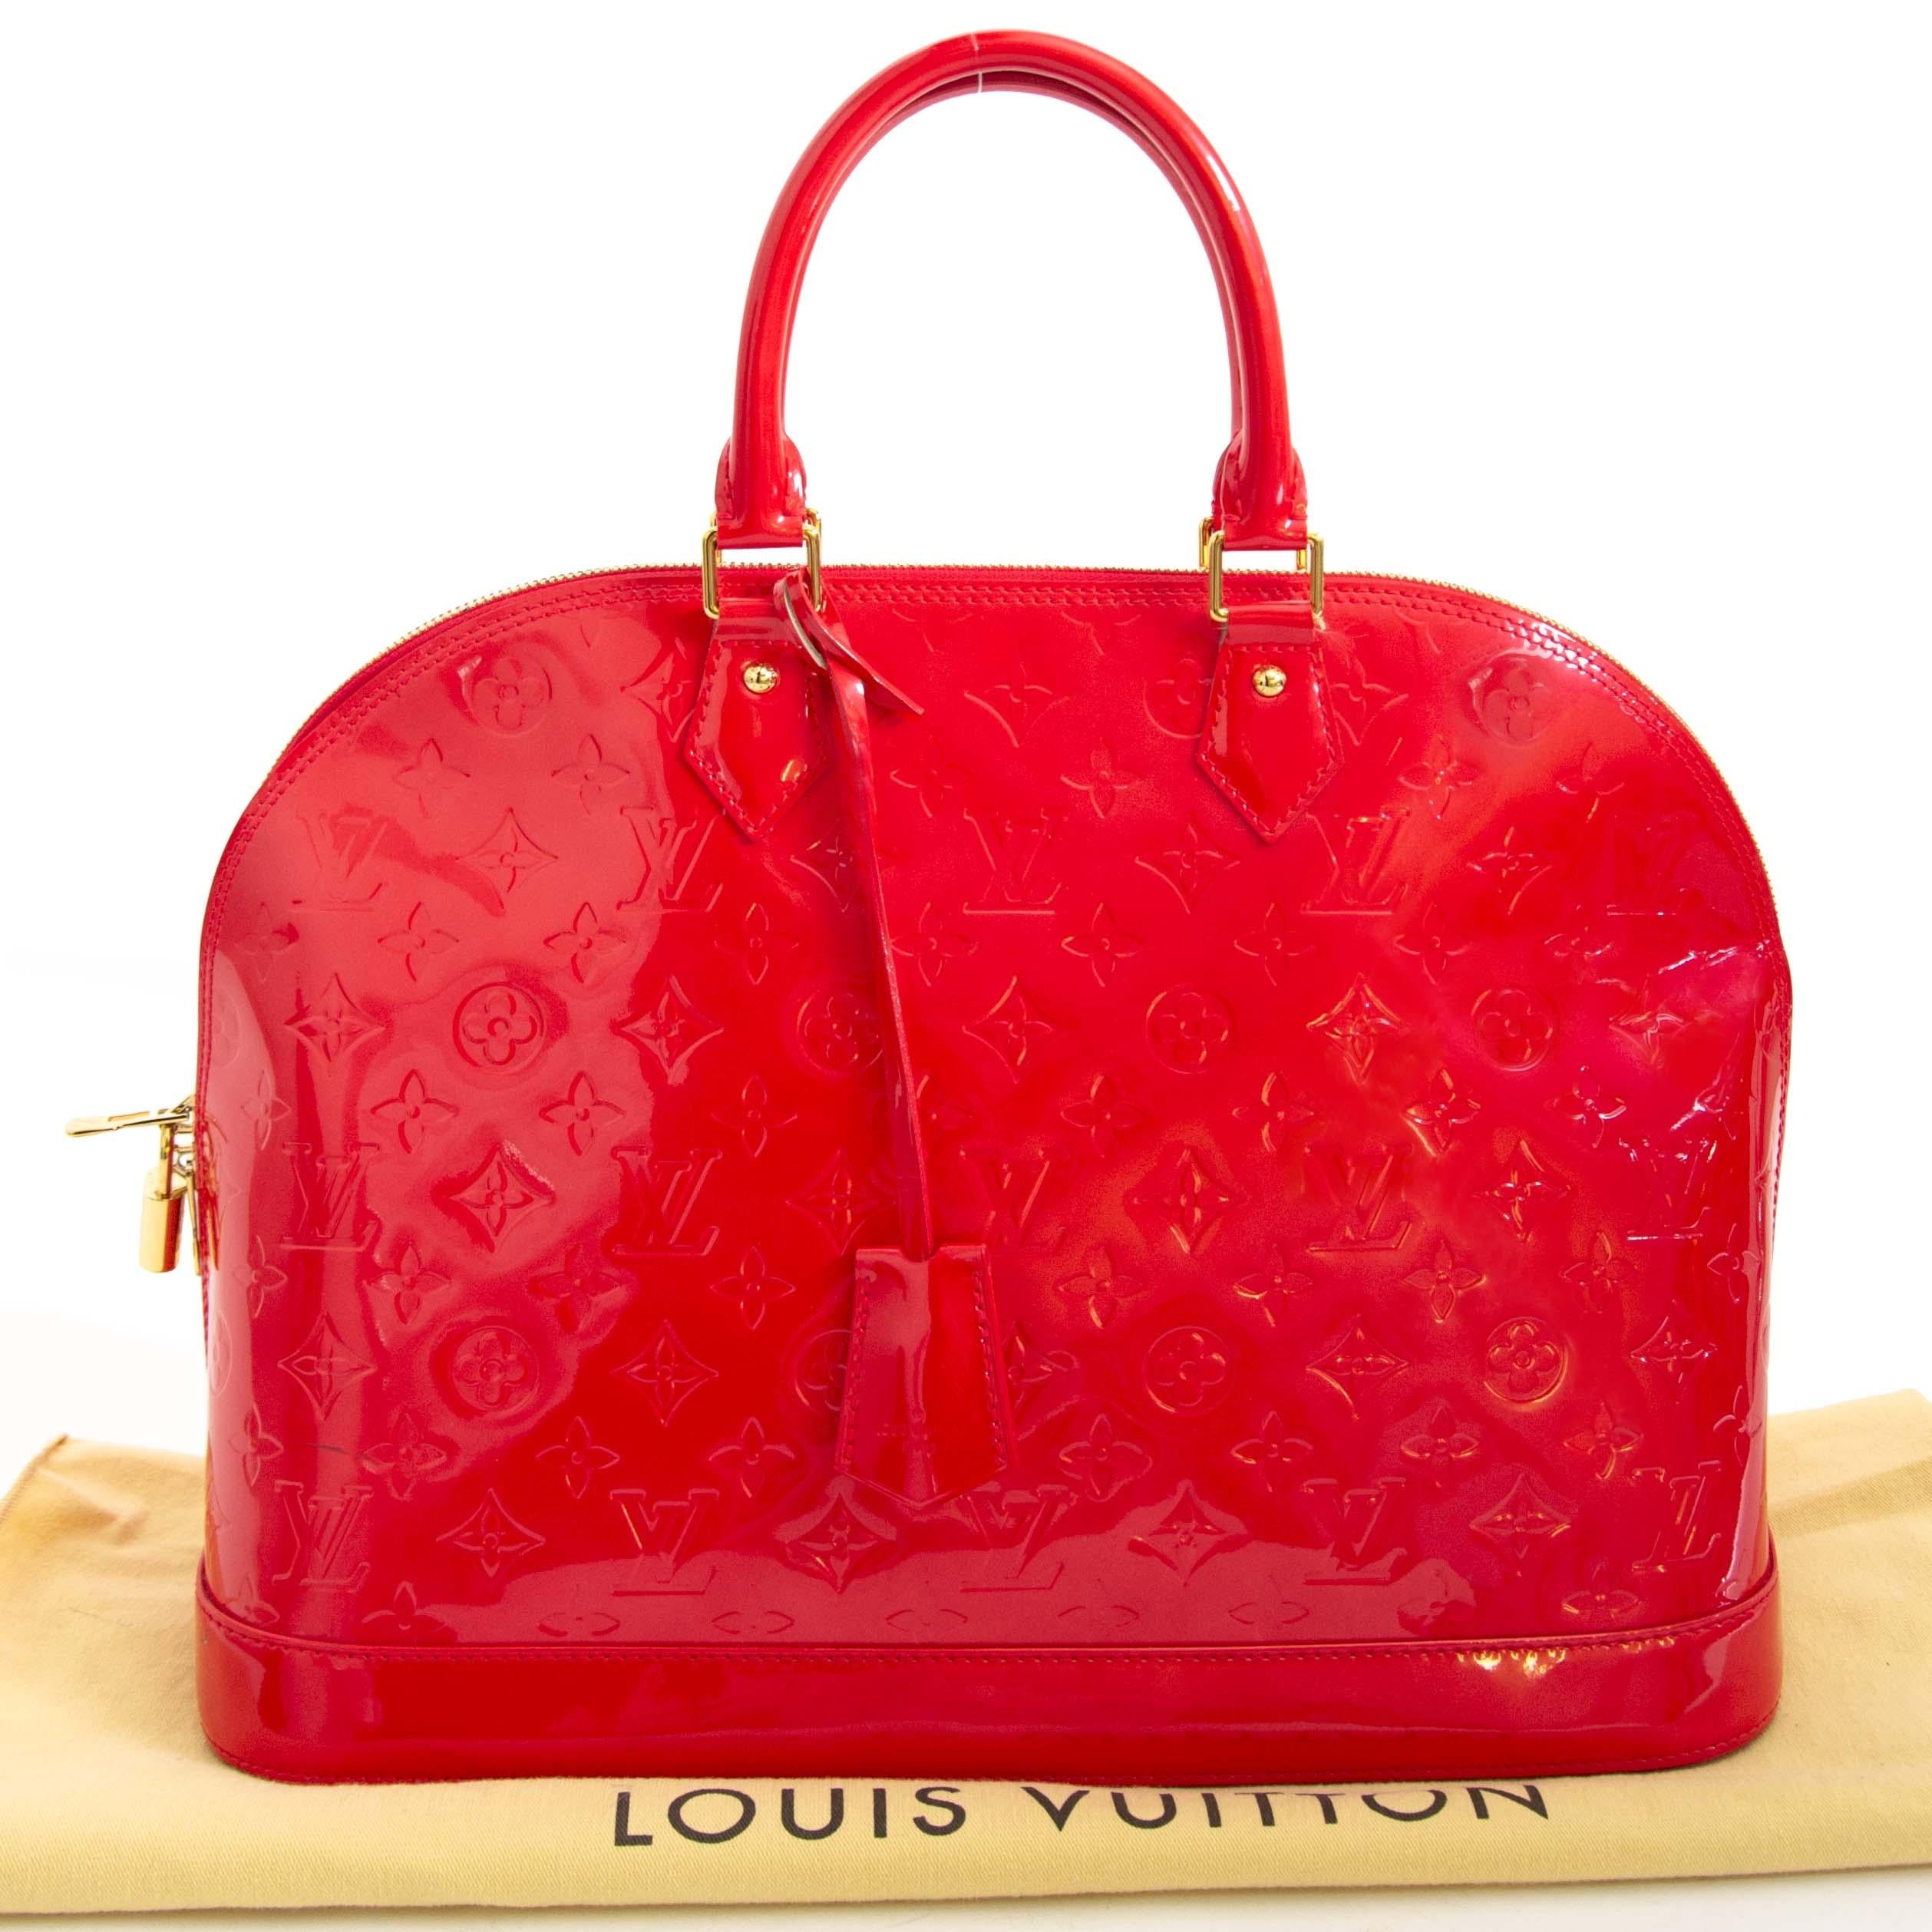 Very Good Preloved Condition

Louis Vuitton Alma Grenadine Vernis MM

This stylish Louis Vuitton Alma patent Grenadine monogram vernis leather is the perfect day to night compagnon. 
This practical top handlje bag is finished with rolled top